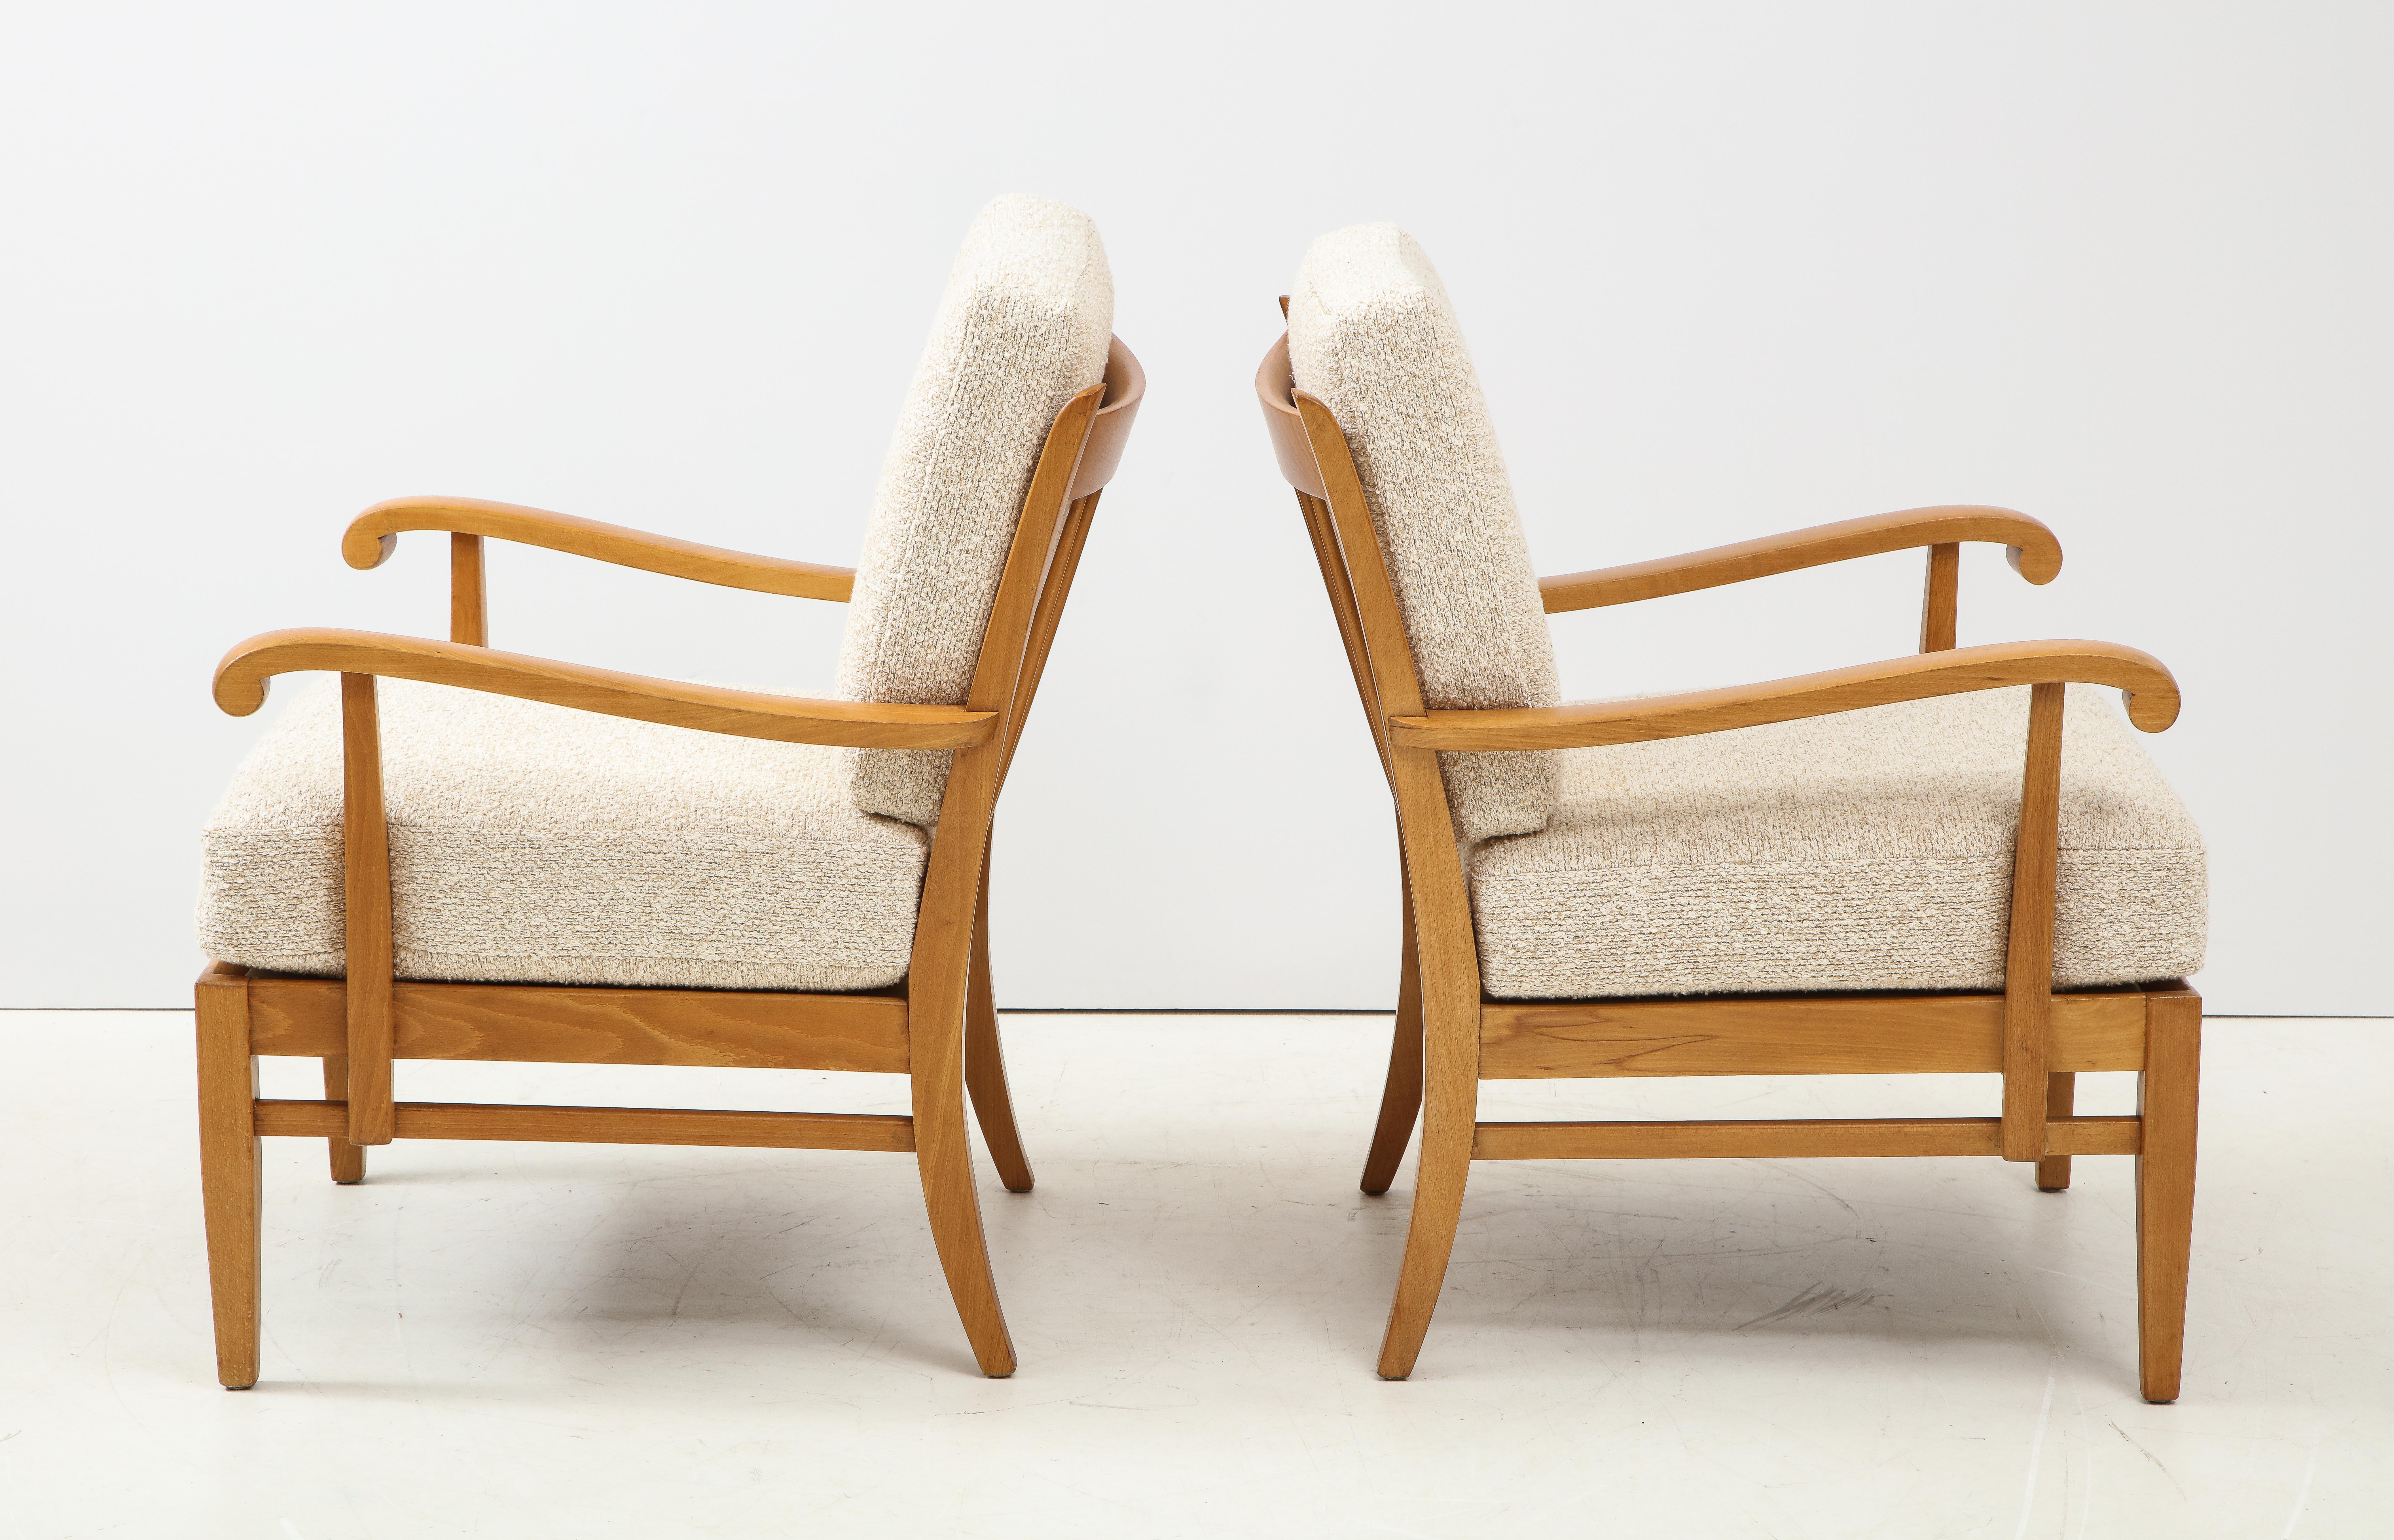 Upholstery Pair of Maison Gouffé Armchairs, France, circa 1940, Labeled, Numbered